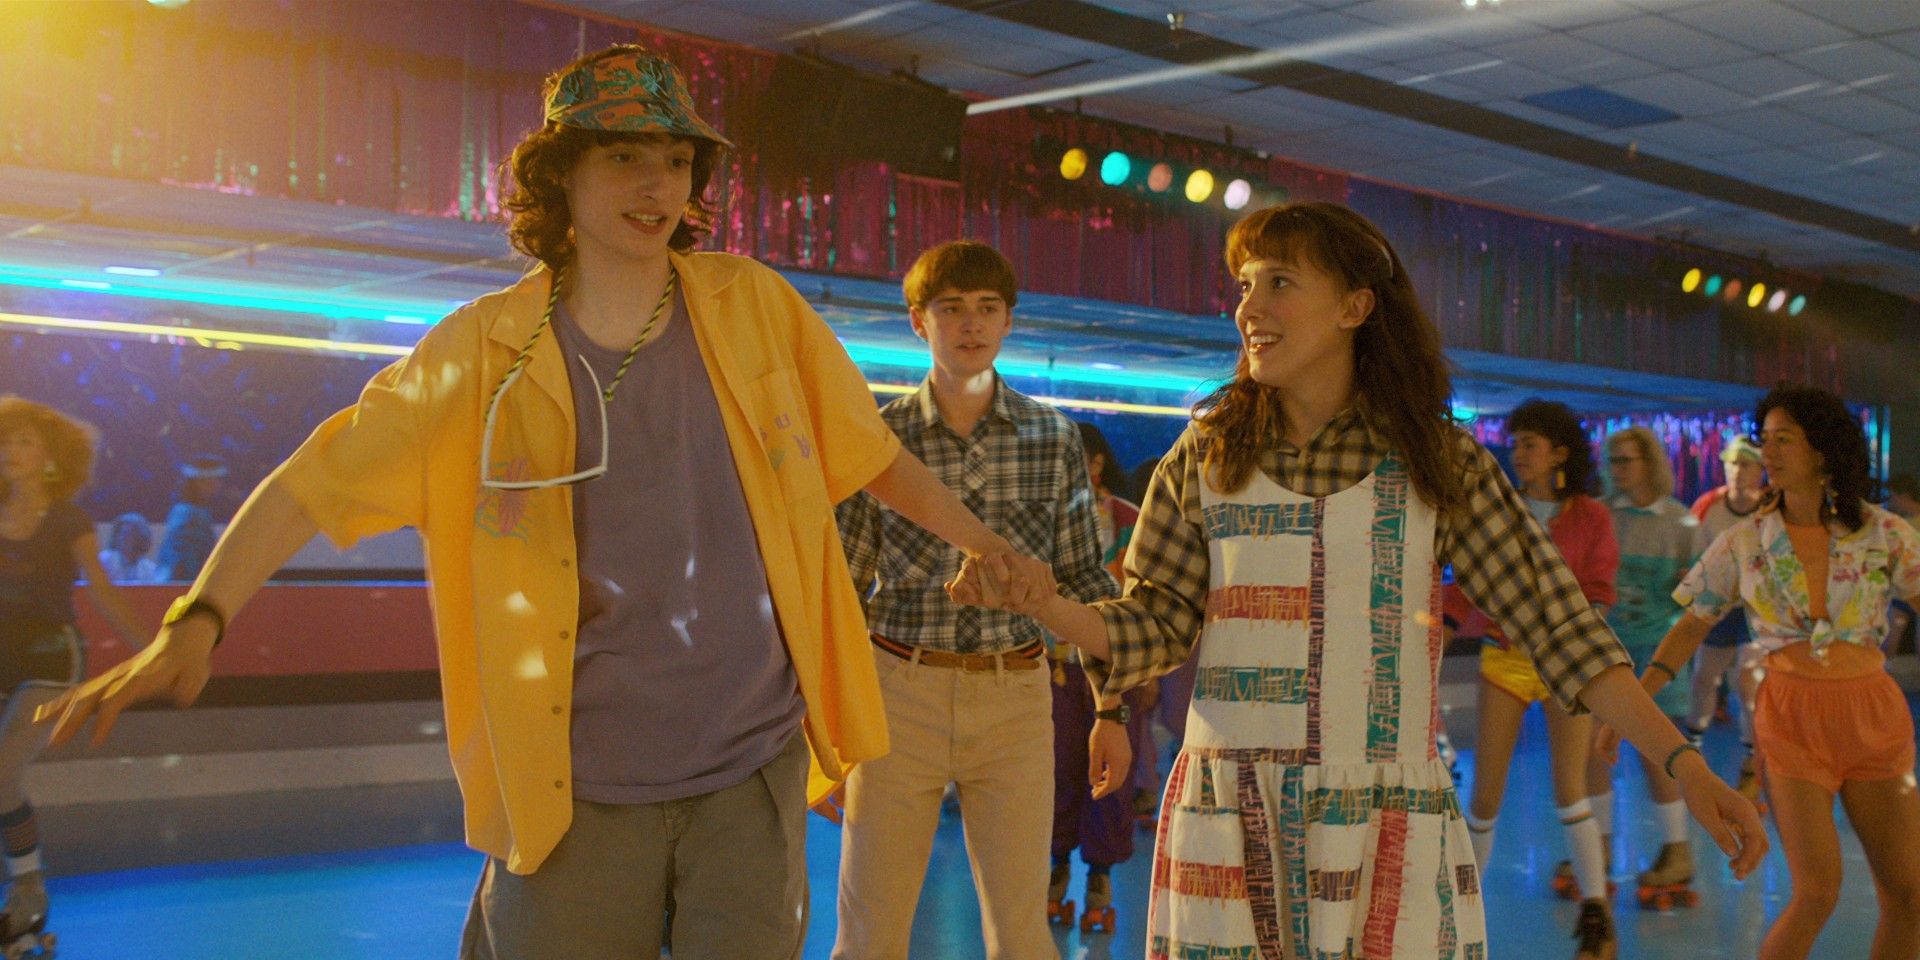 Mike Wheeler, El Hopper, and Eleven in Stranger Things